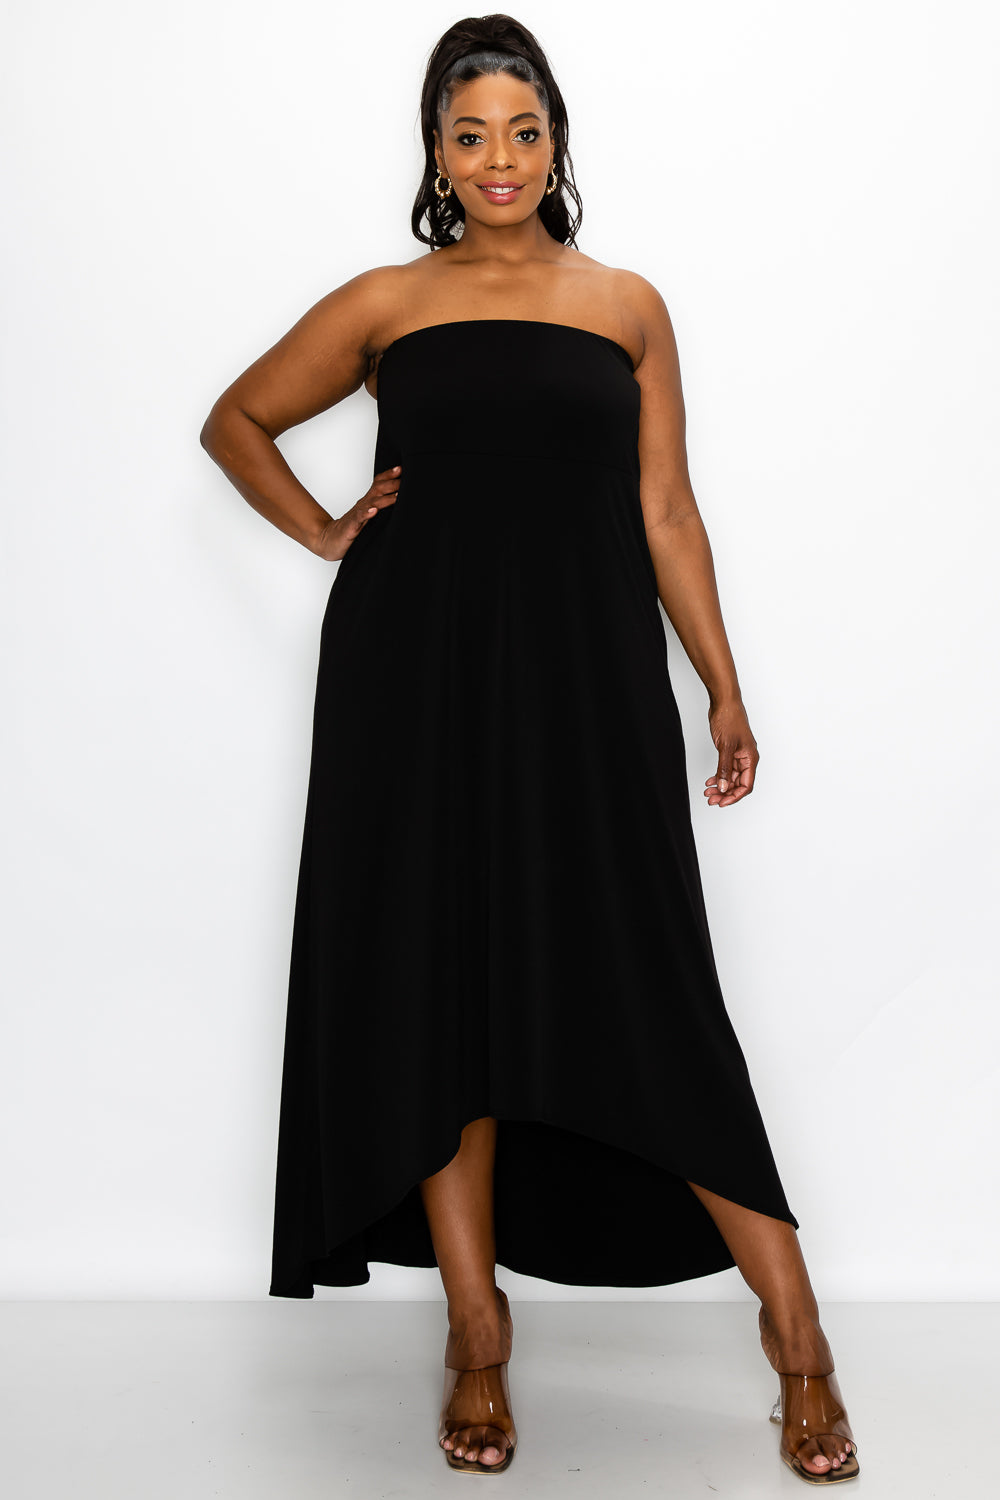 livd plus size boutique strapless high low dress in black